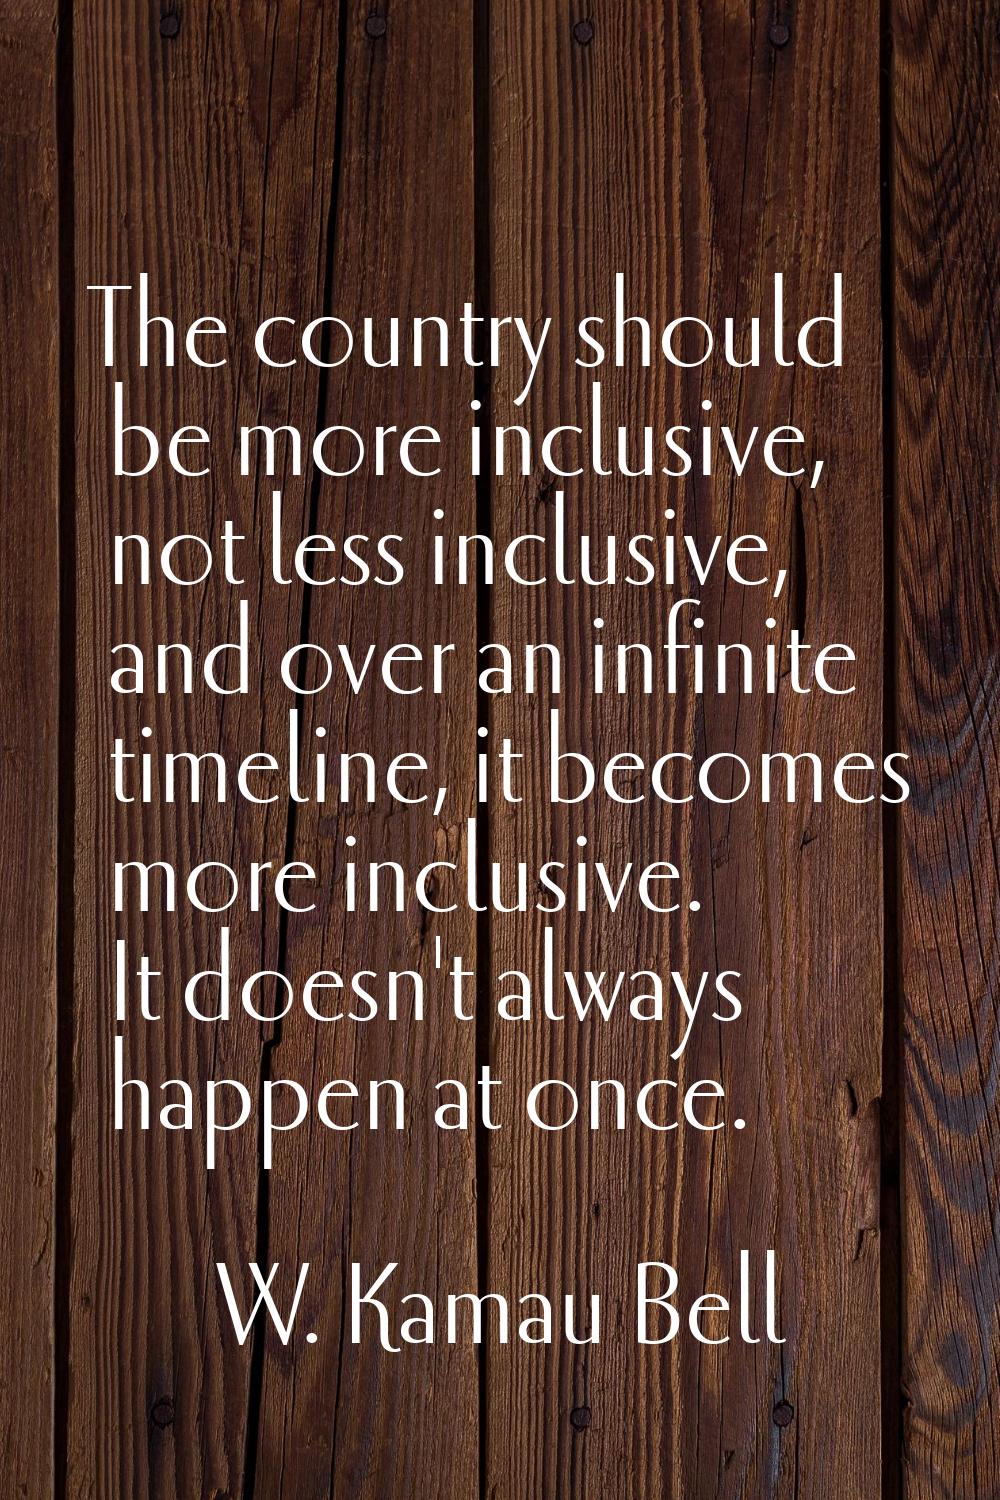 The country should be more inclusive, not less inclusive, and over an infinite timeline, it becomes